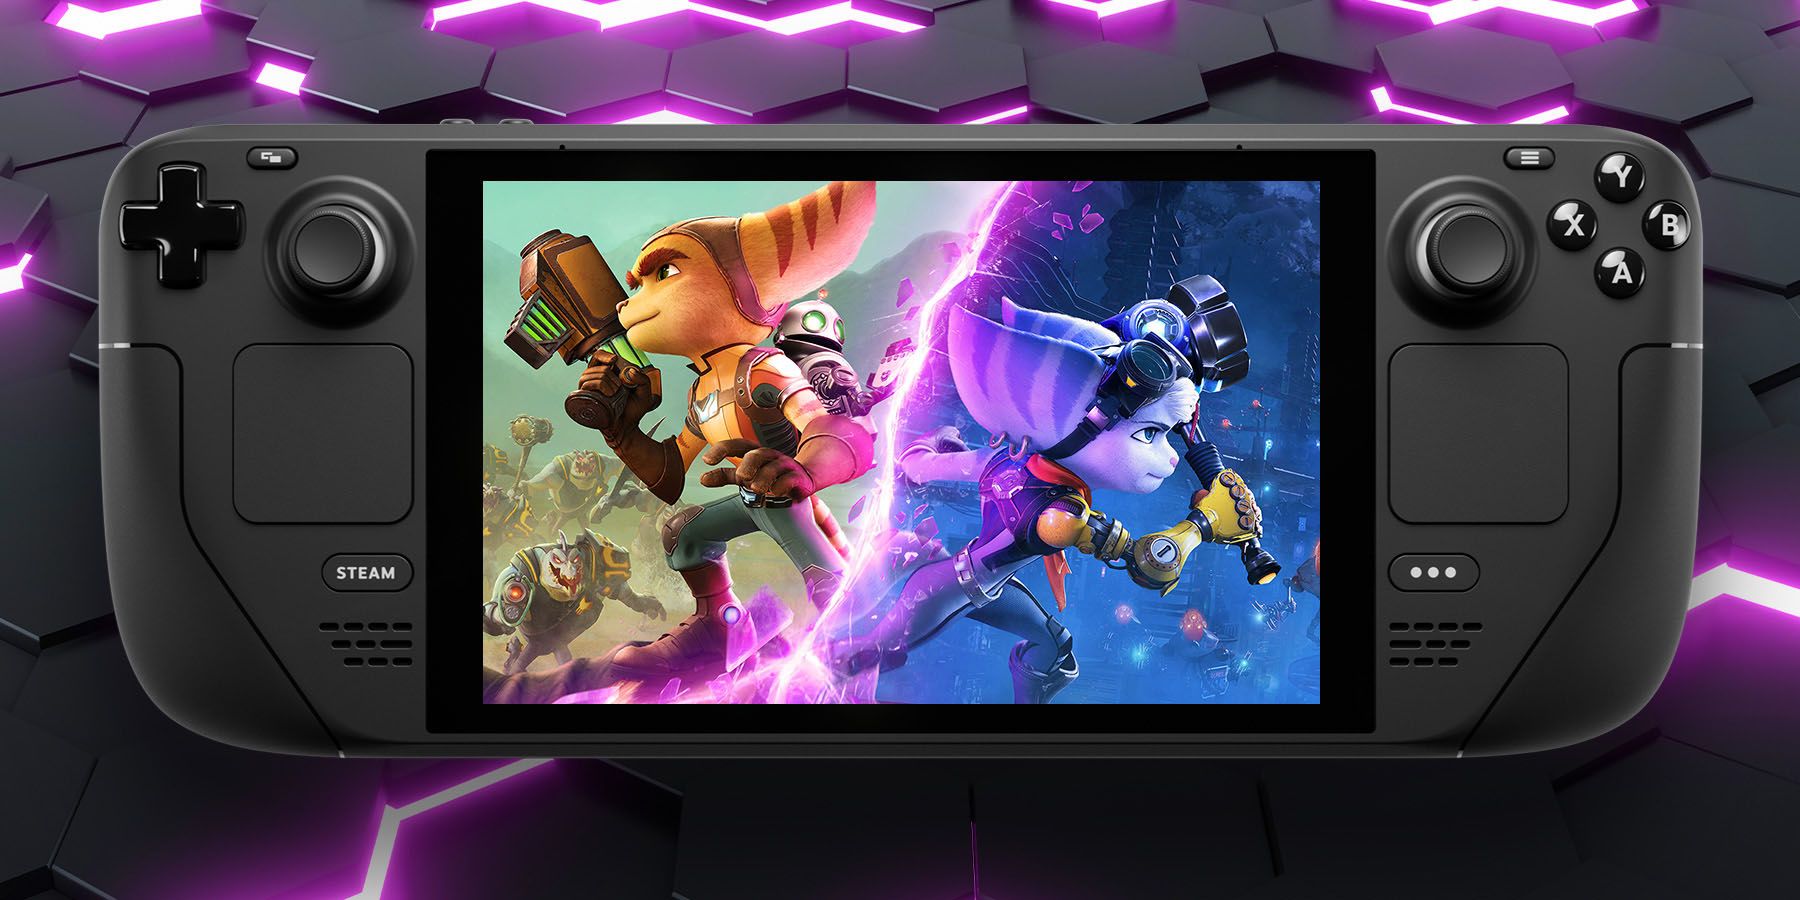 An image of Ratchet and Rivet from the PC port of Ratchet & Clank Rift Apart, running on a Steam Deck.